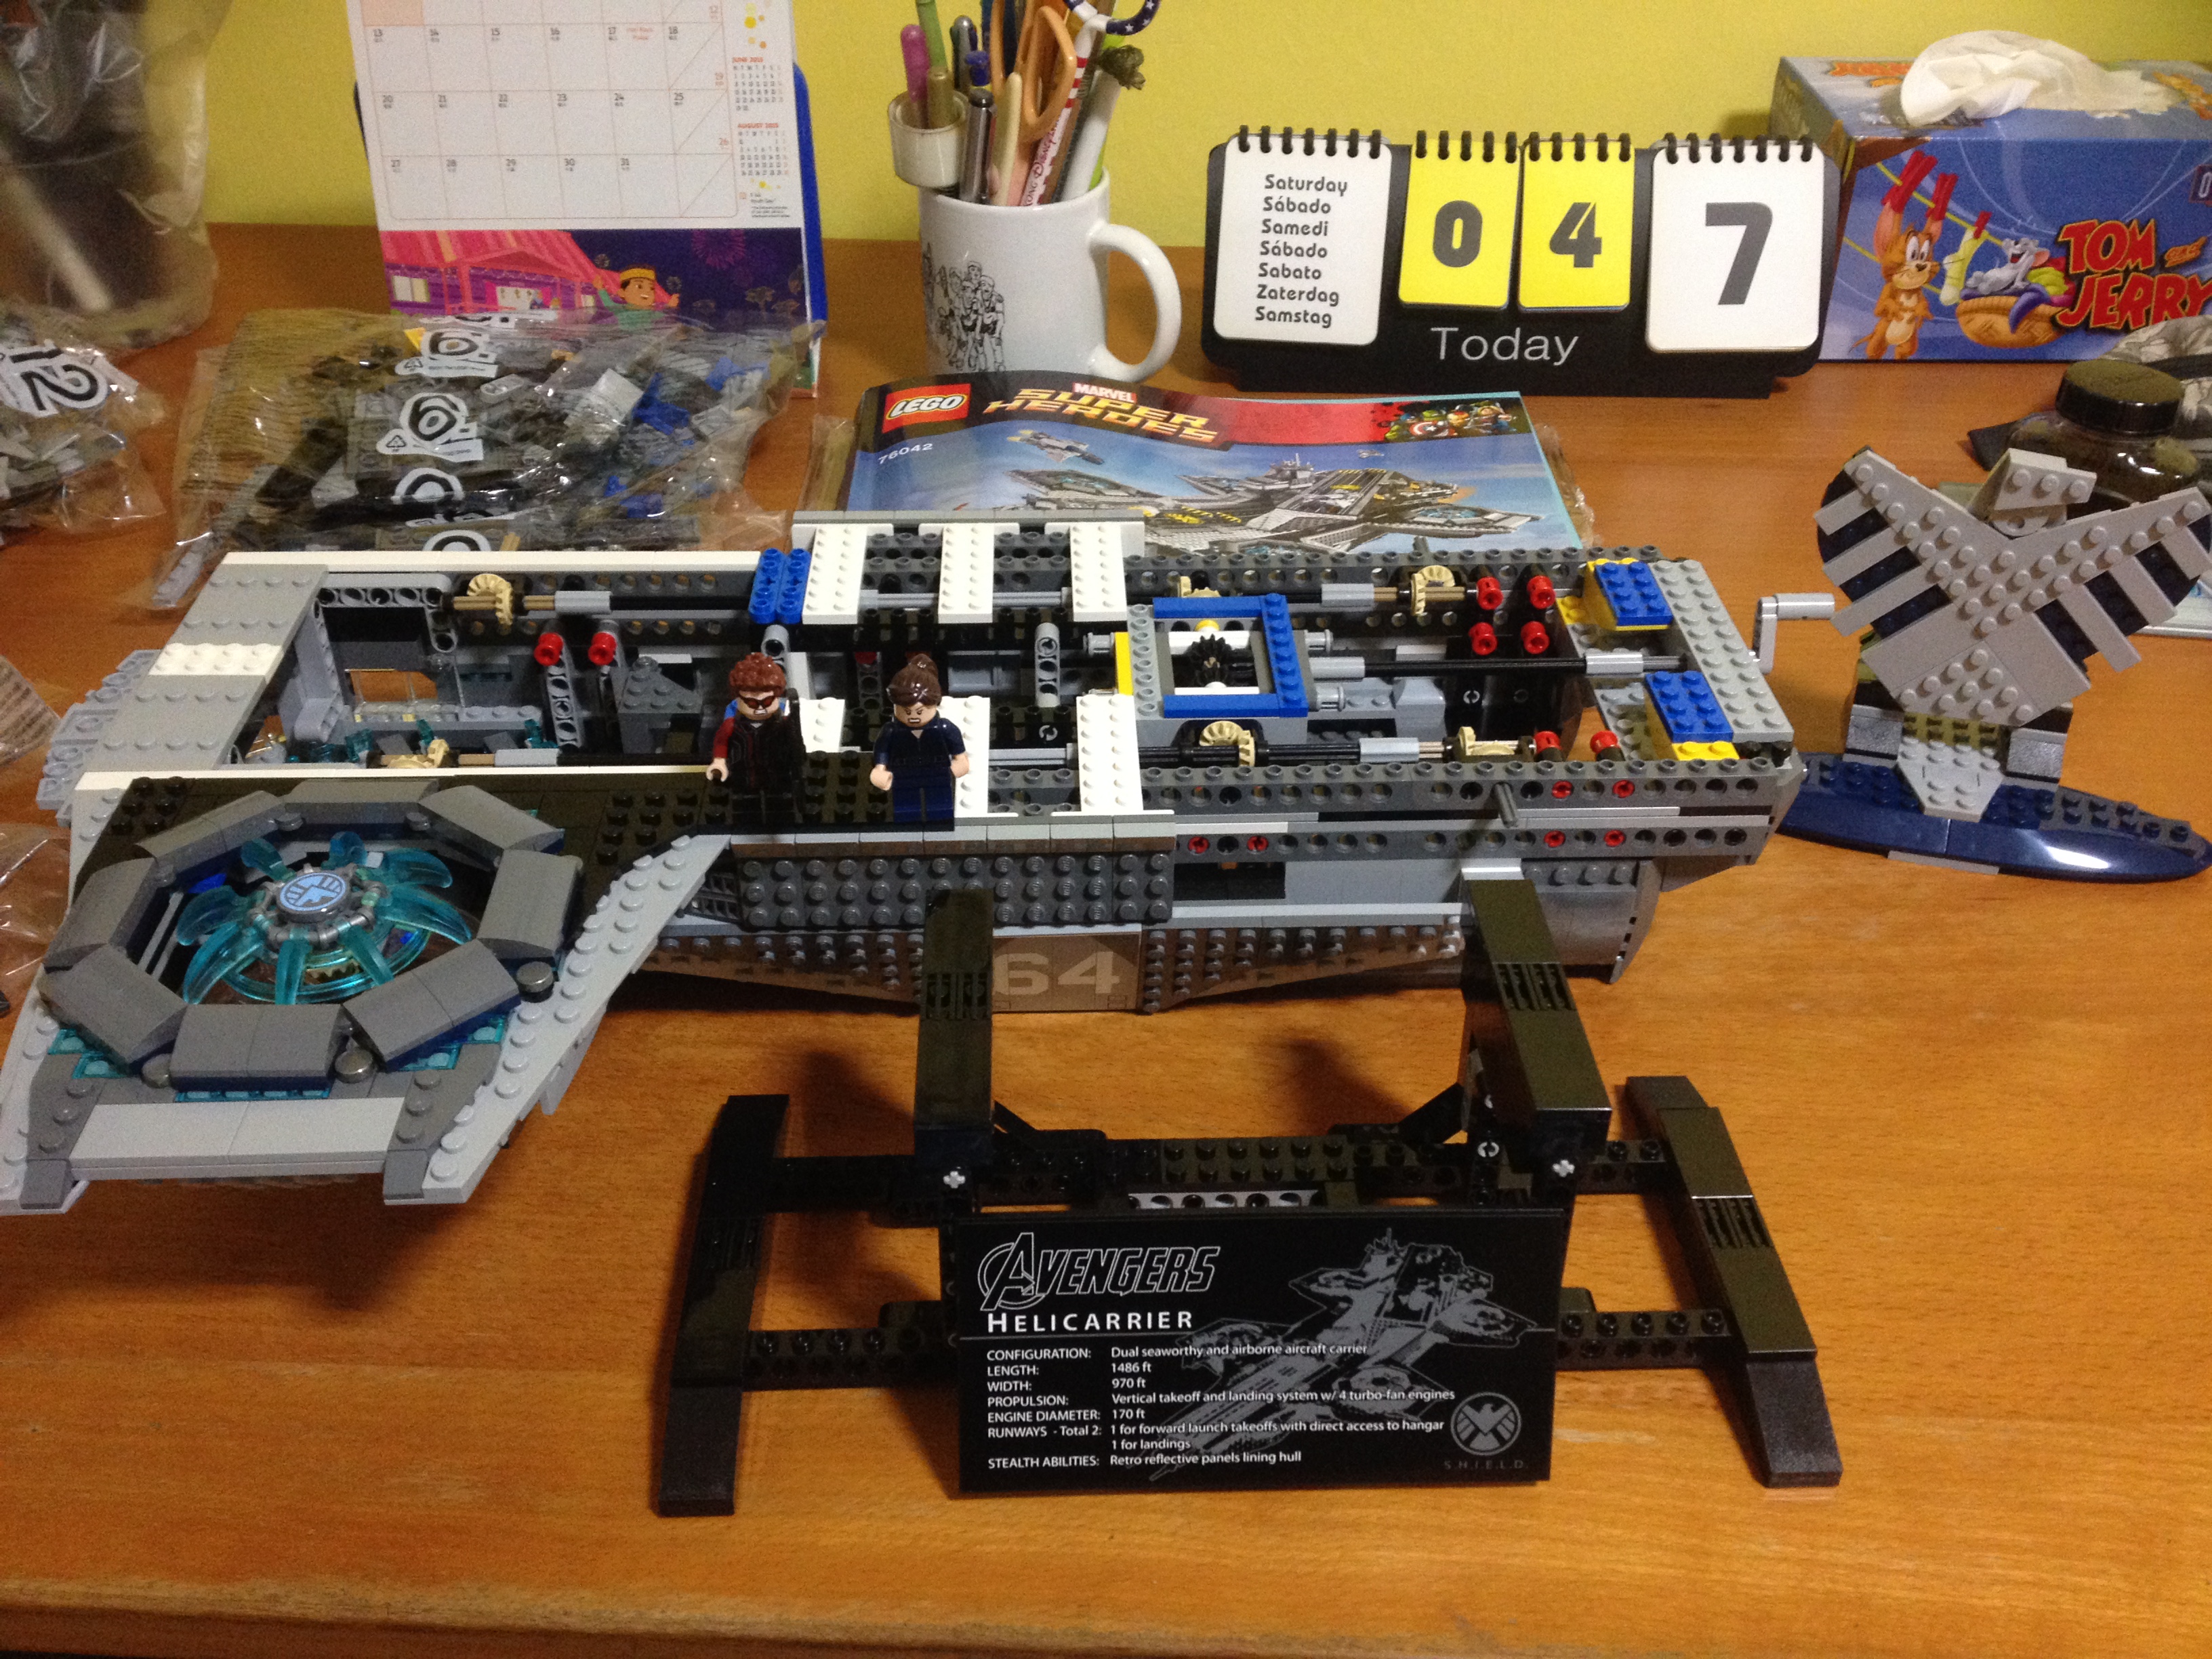 Partially completed Lego SHIELD Helicarrier